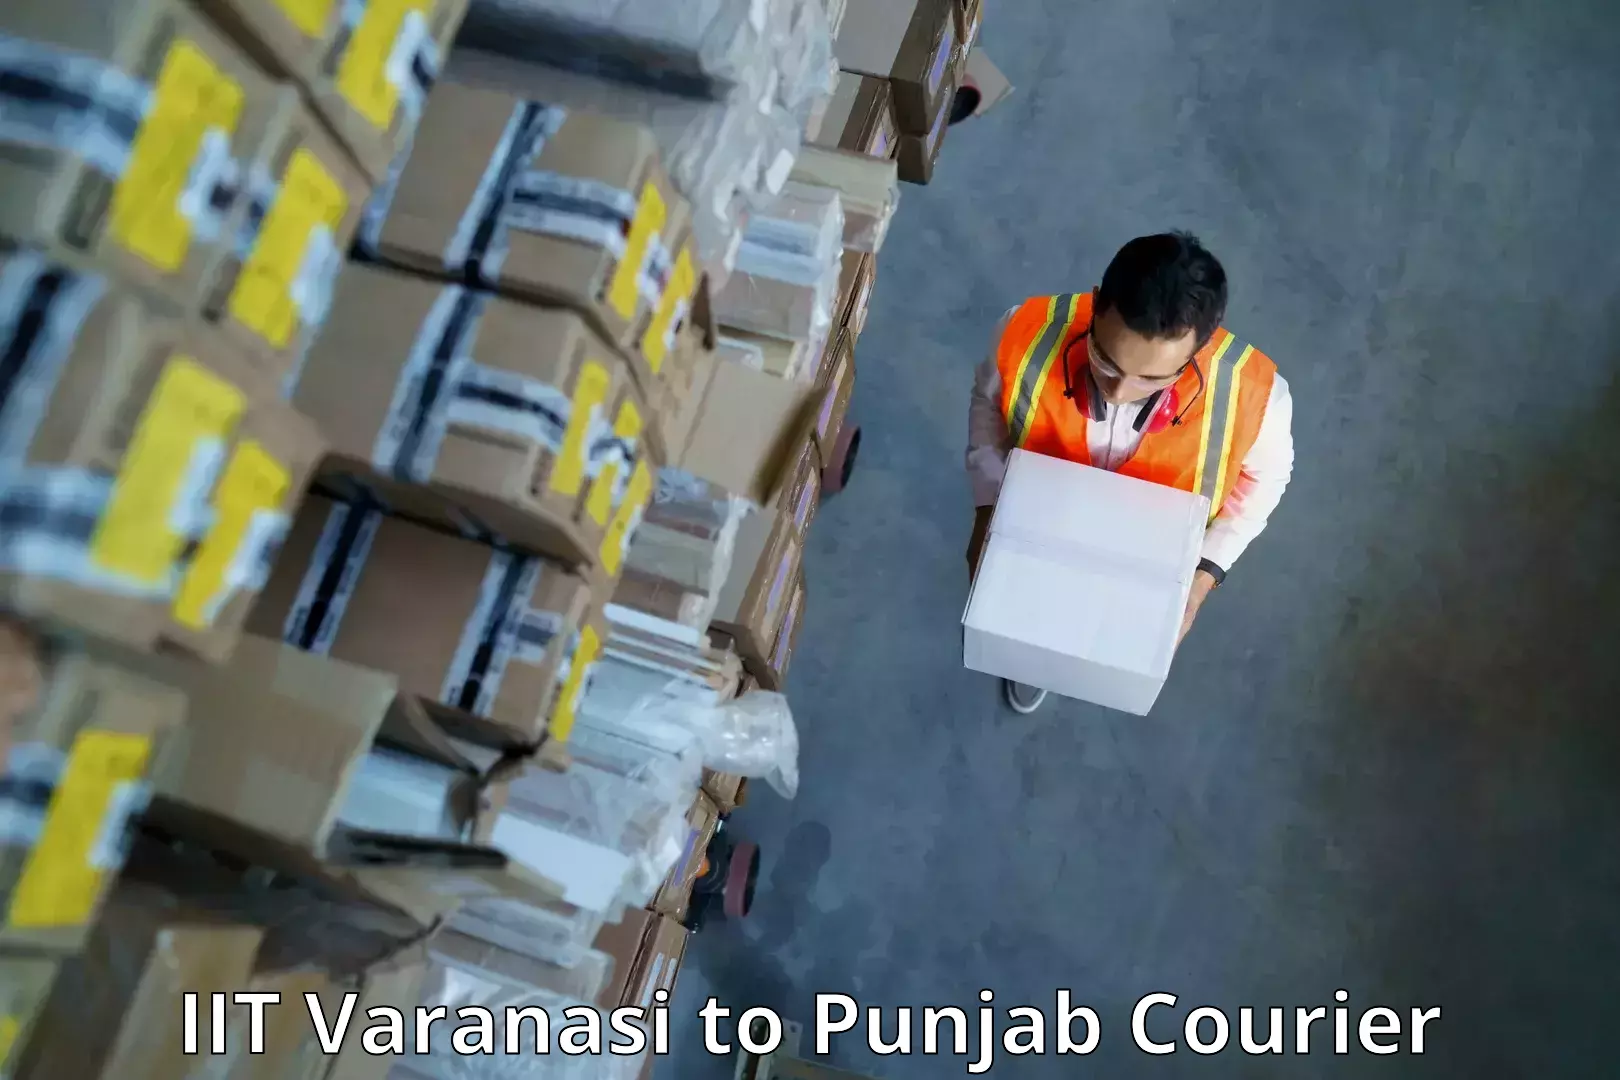 Next-day freight services in IIT Varanasi to Barnala